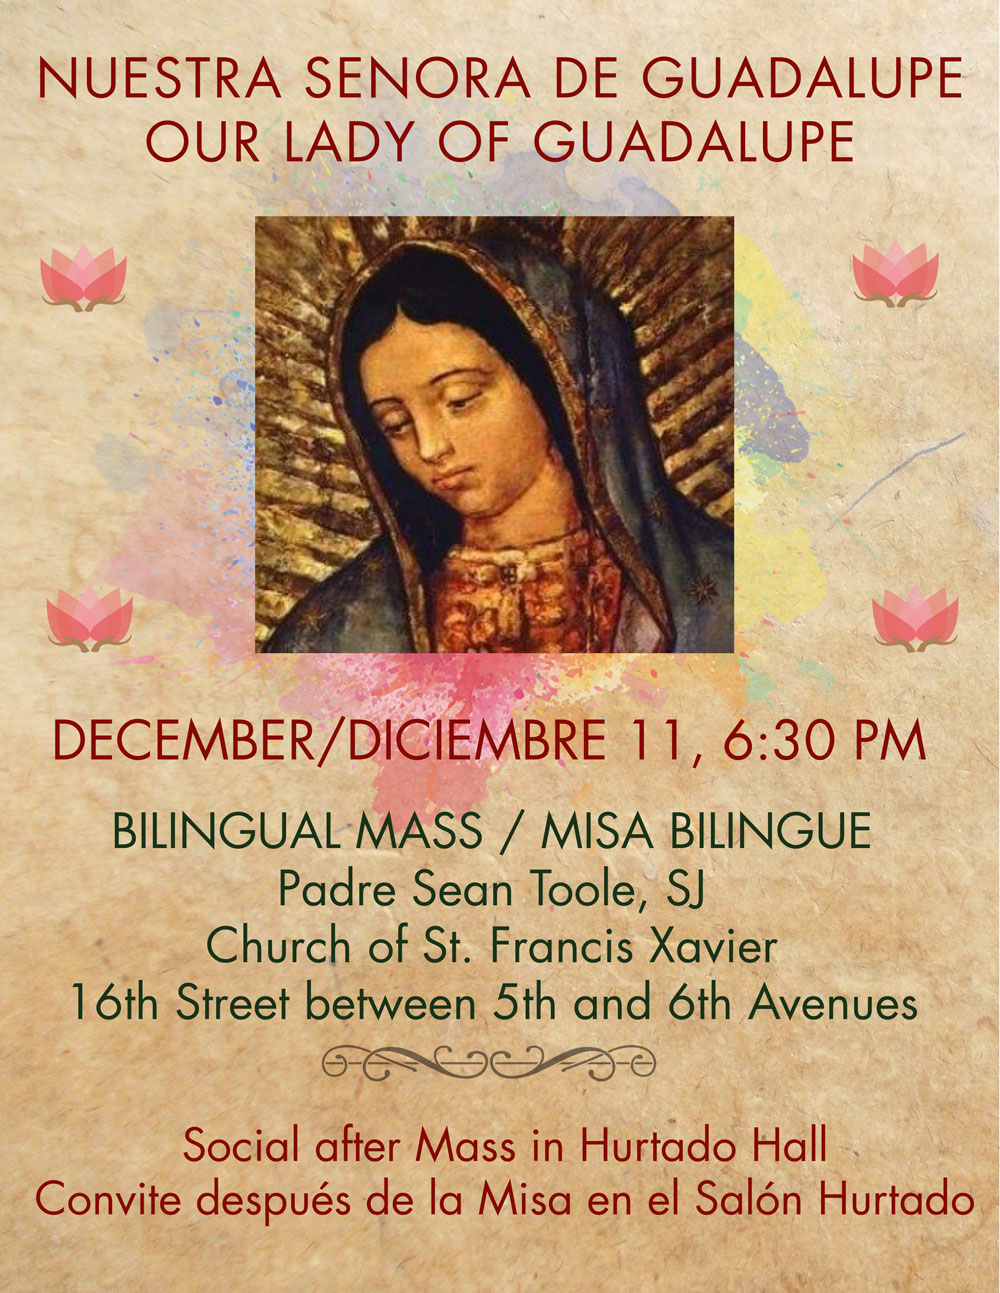 Our Lady of Guadalupe Mass